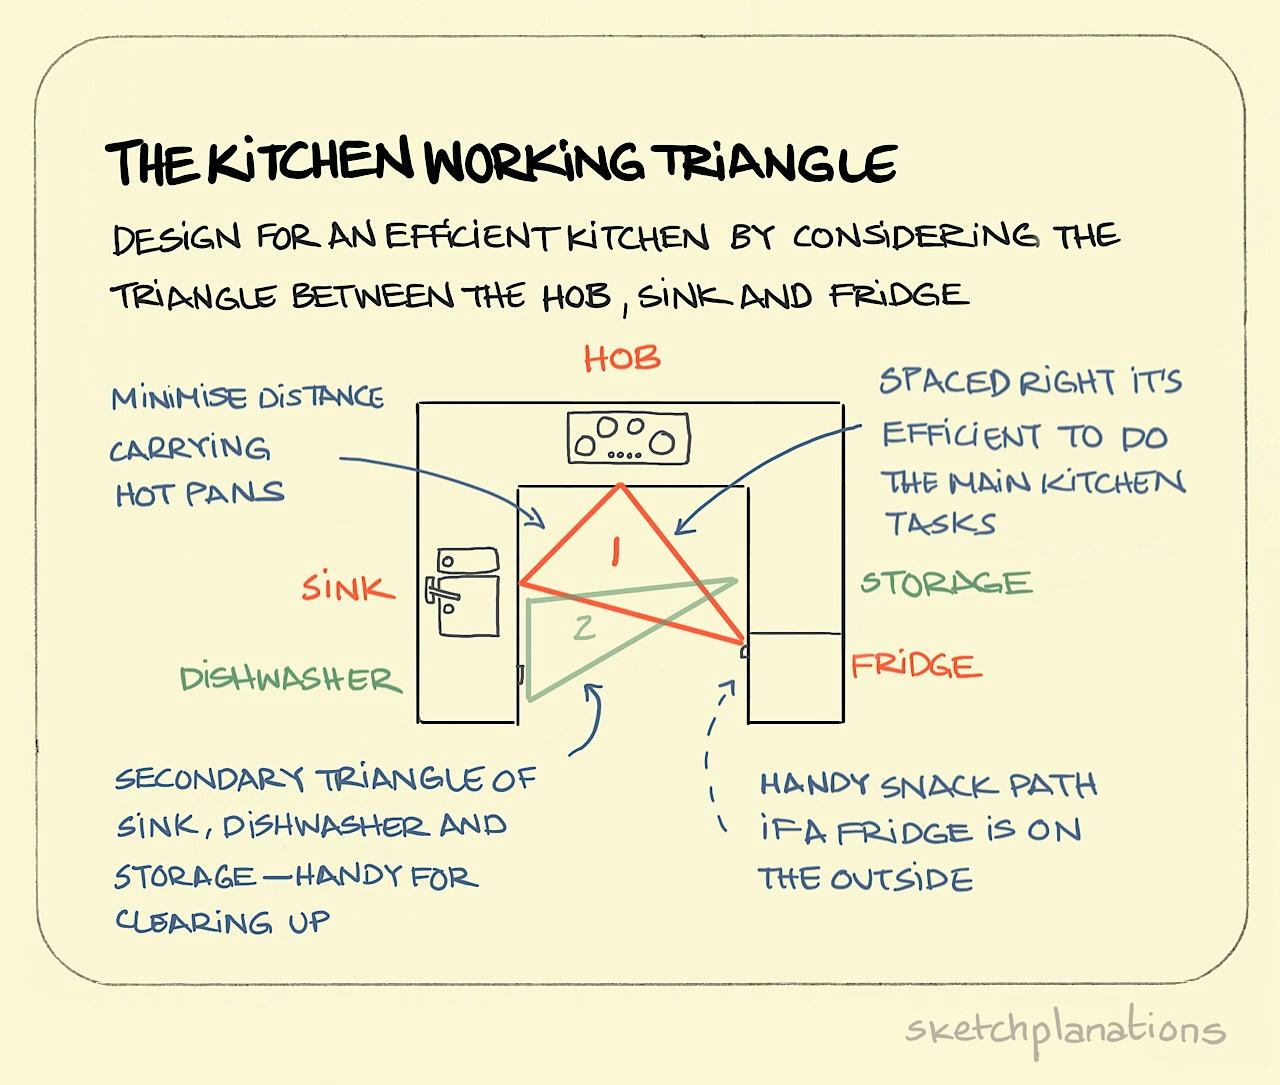 The kitchen working triangle - Sketchplanations